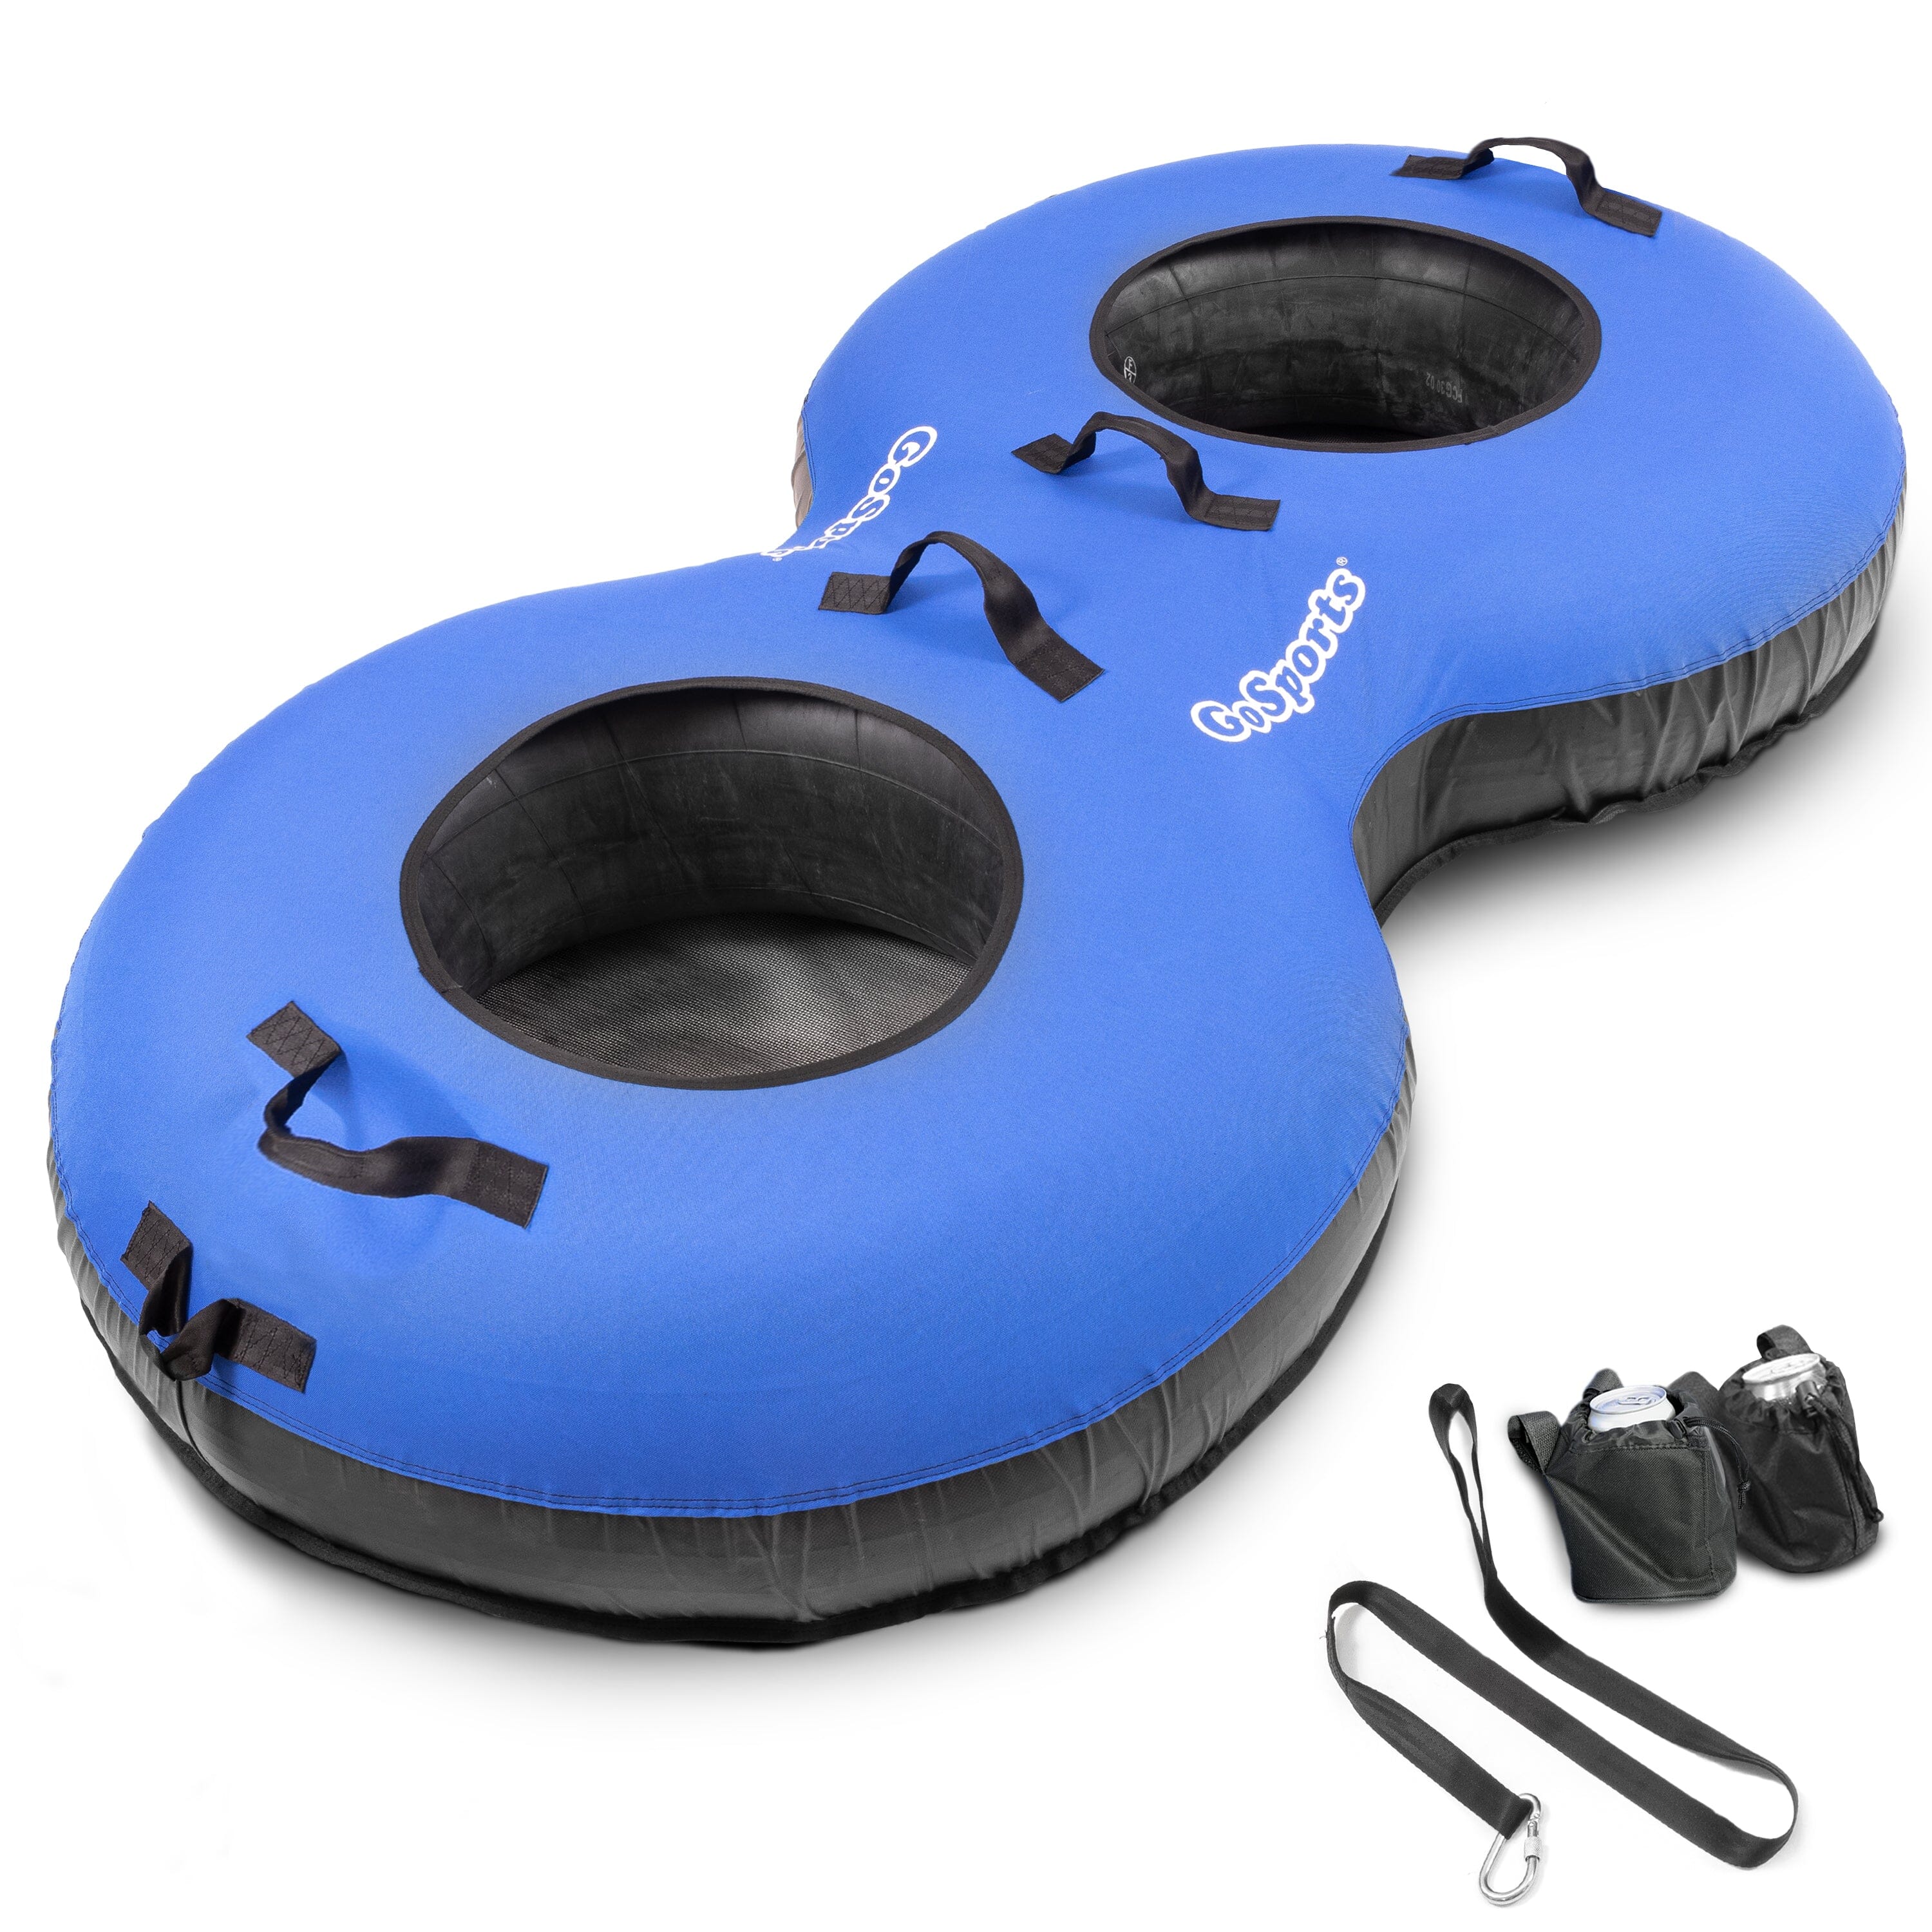 GoSports Heavy Duty 2 Person Floating River Tube with Premium